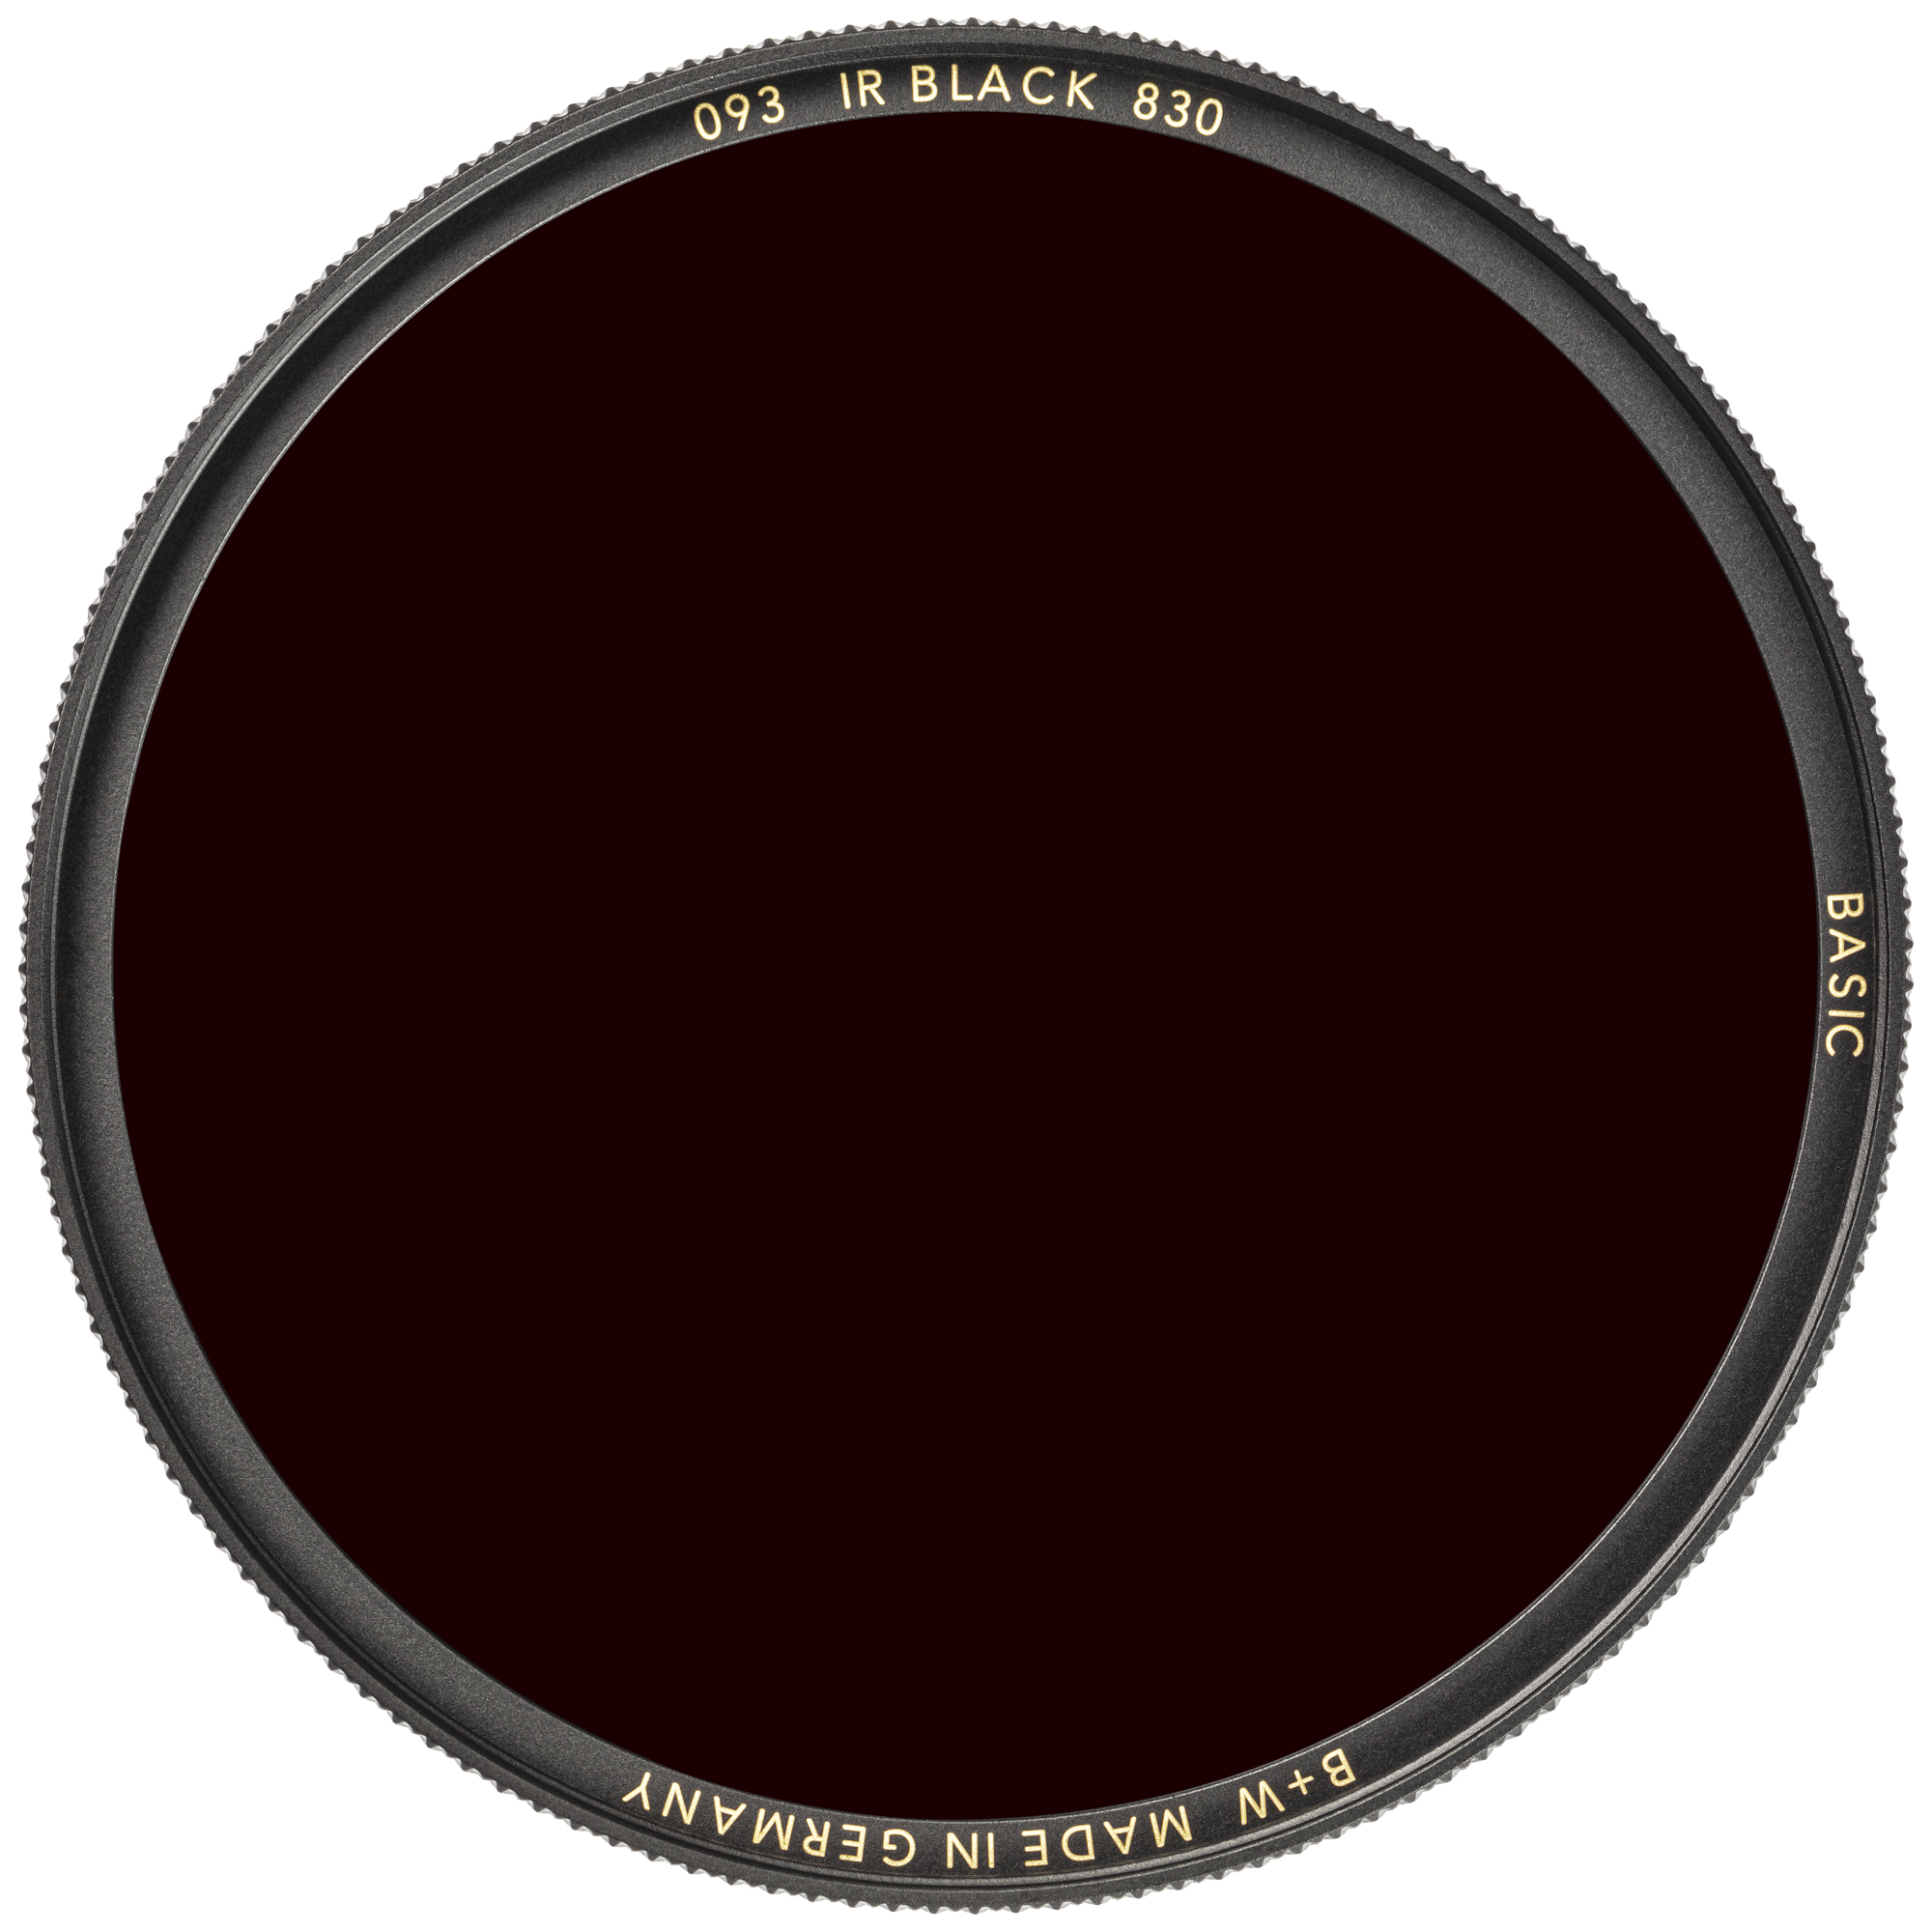 B+W Filter - Product - Basic - Front - 093_IR_Black_Red_830.jpg